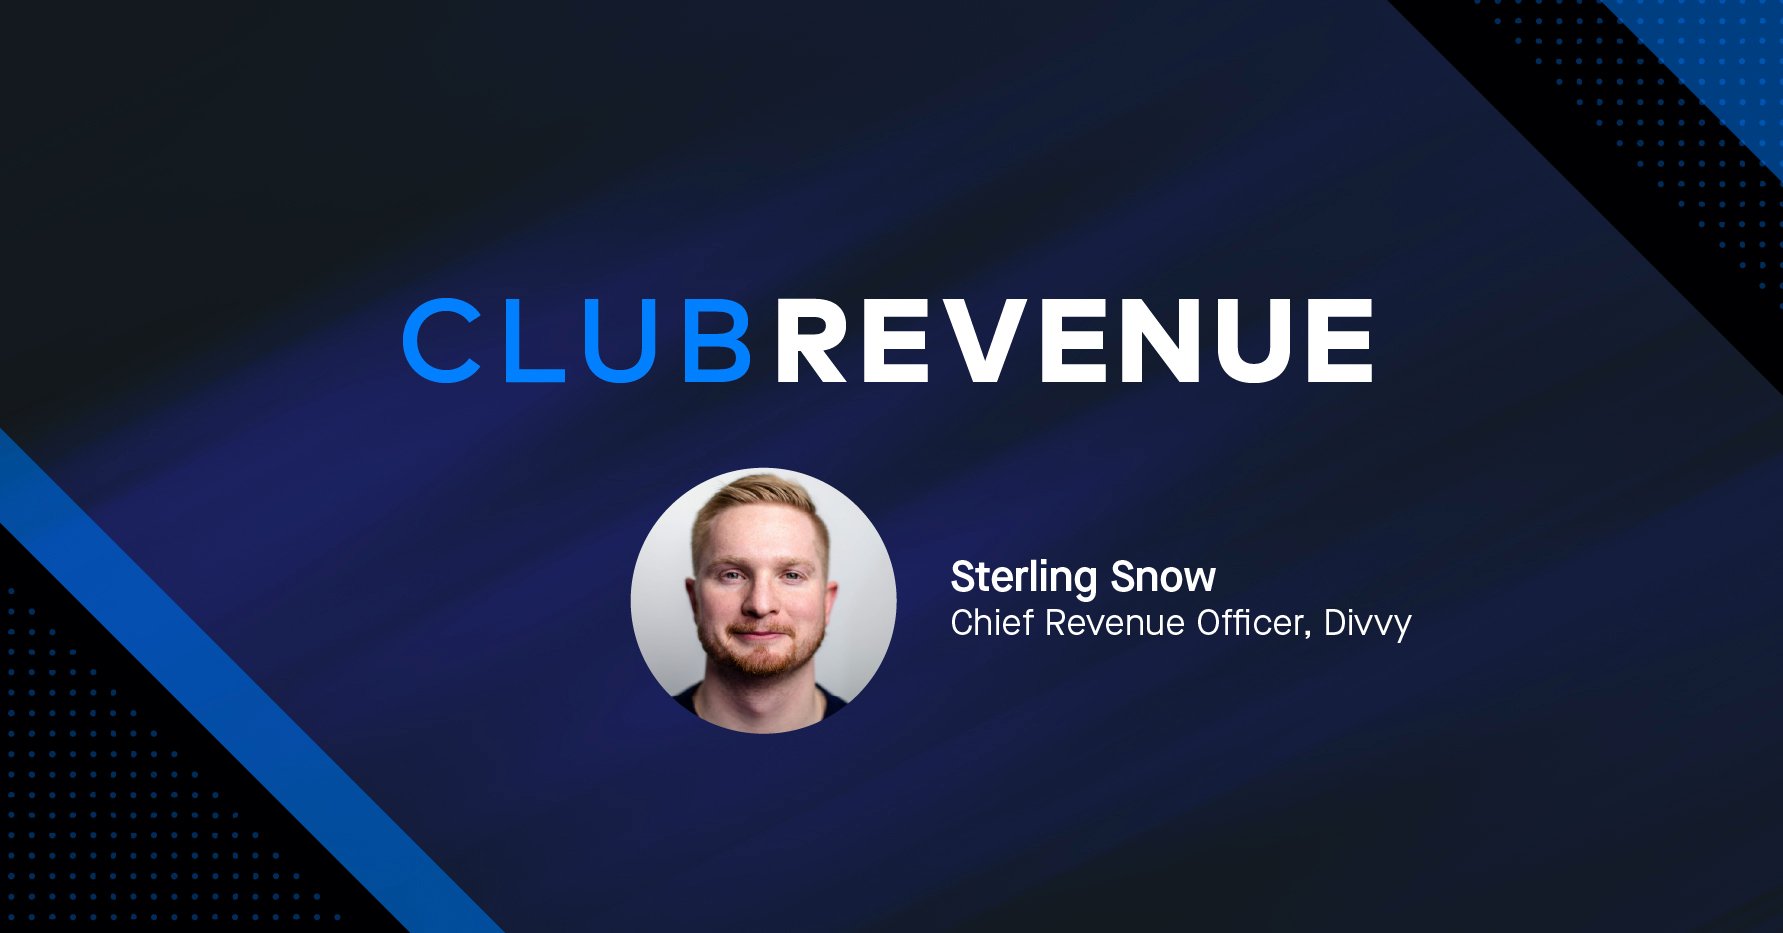 Club Revenue banner featuring Sterling Snow, Chief Revenue Officer at Divvy